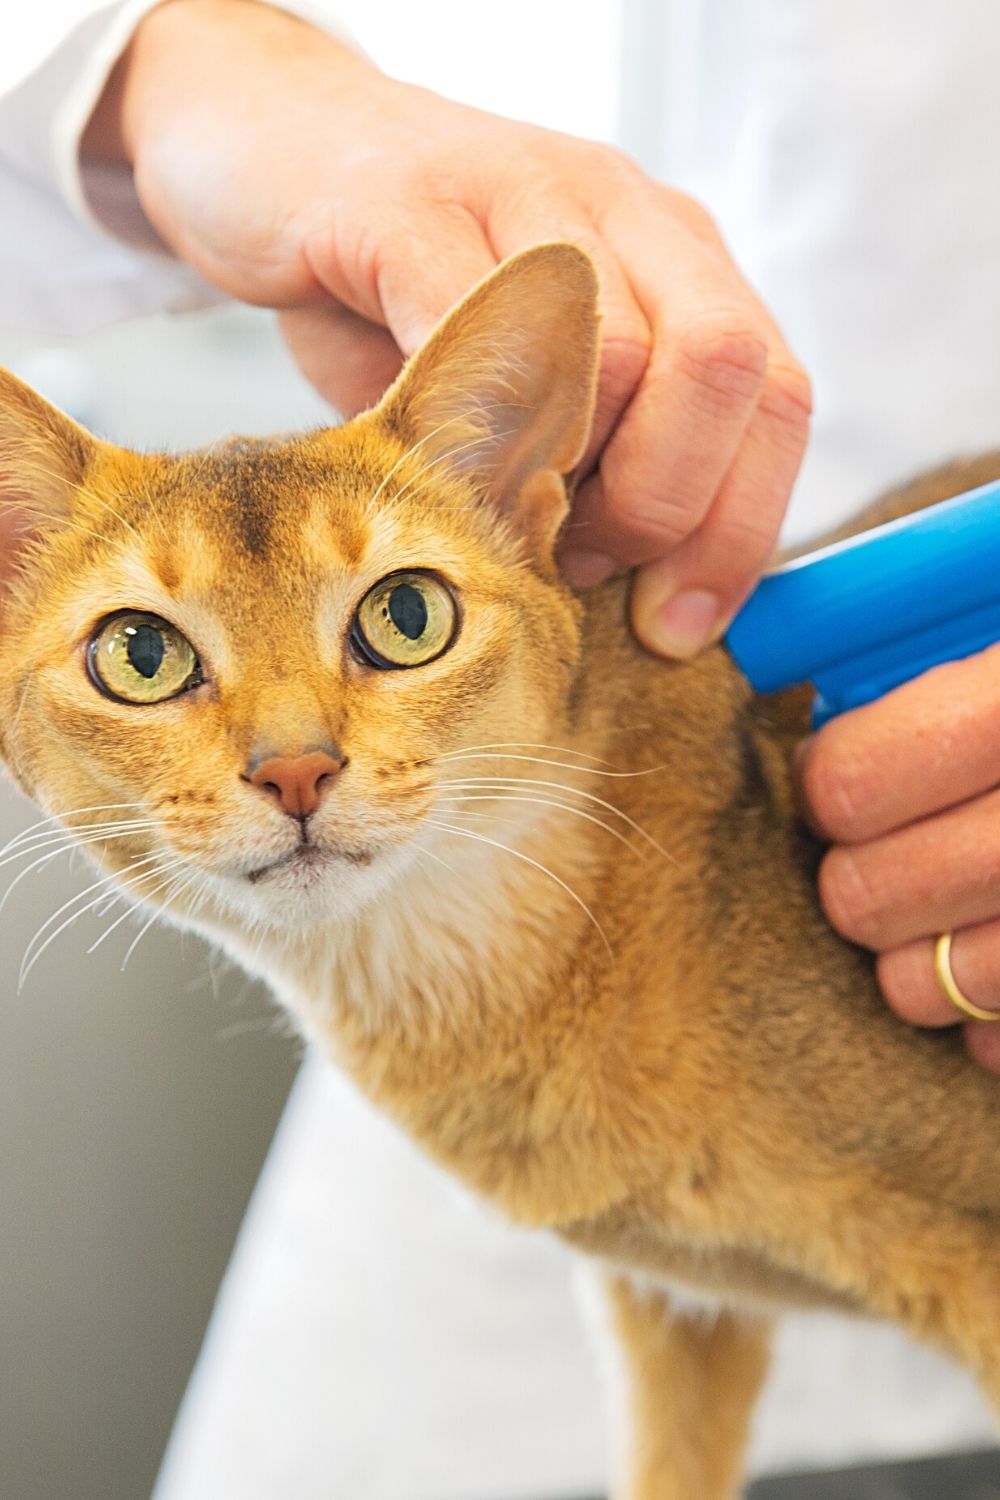 One way to help in tracking a lost cat is through microchipping